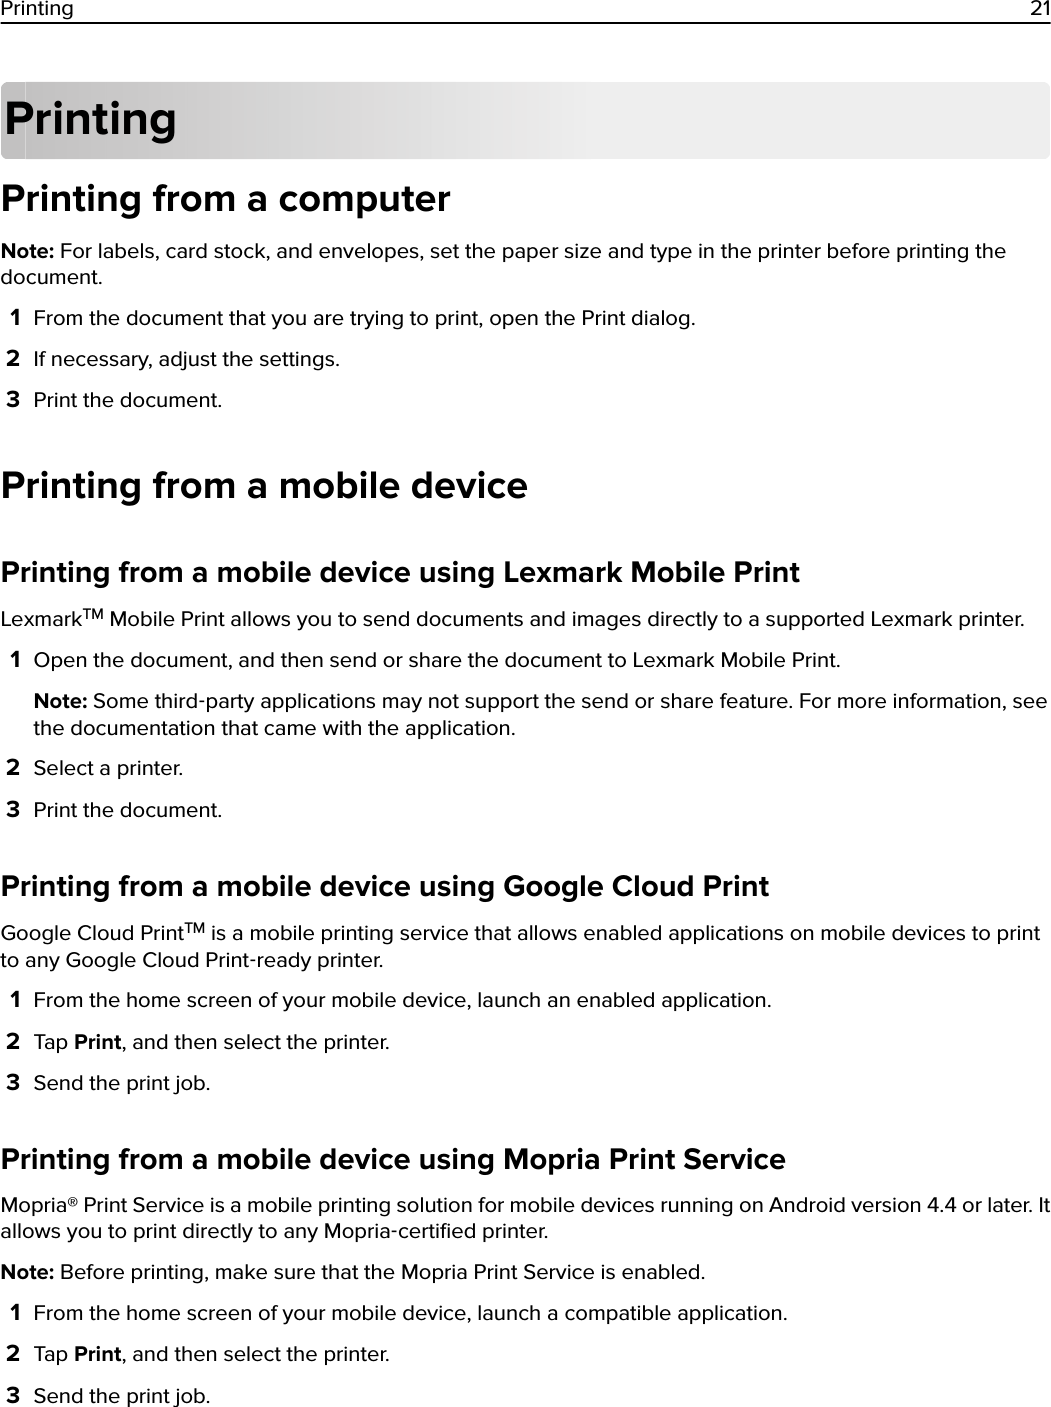 PrintingPrinting from a computerNote: For labels, card stock, and envelopes, set the paper size and type in the printer before printing thedocument.1From the document that you are trying to print, open the Print dialog.2If necessary, adjust the settings.3Print the document.Printing from a mobile devicePrinting from a mobile device using Lexmark Mobile PrintLexmarkTM Mobile Print allows you to send documents and images directly to a supported Lexmark printer.1Open the document, and then send or share the document to Lexmark Mobile Print.Note: Some third‑party applications may not support the send or share feature. For more information, seethe documentation that came with the application.2Select a printer.3Print the document.Printing from a mobile device using Google Cloud PrintGoogle Cloud PrintTM is a mobile printing service that allows enabled applications on mobile devices to printto any Google Cloud Print‑ready printer.1From the home screen of your mobile device, launch an enabled application.2Tap Print, and then select the printer.3Send the print job.Printing from a mobile device using Mopria Print ServiceMopria® Print Service is a mobile printing solution for mobile devices running on Android version 4.4 or later. Itallows you to print directly to any Mopria‑certiﬁed printer.Note: Before printing, make sure that the Mopria Print Service is enabled.1From the home screen of your mobile device, launch a compatible application.2Tap Print, and then select the printer.3Send the print job.Printing 21